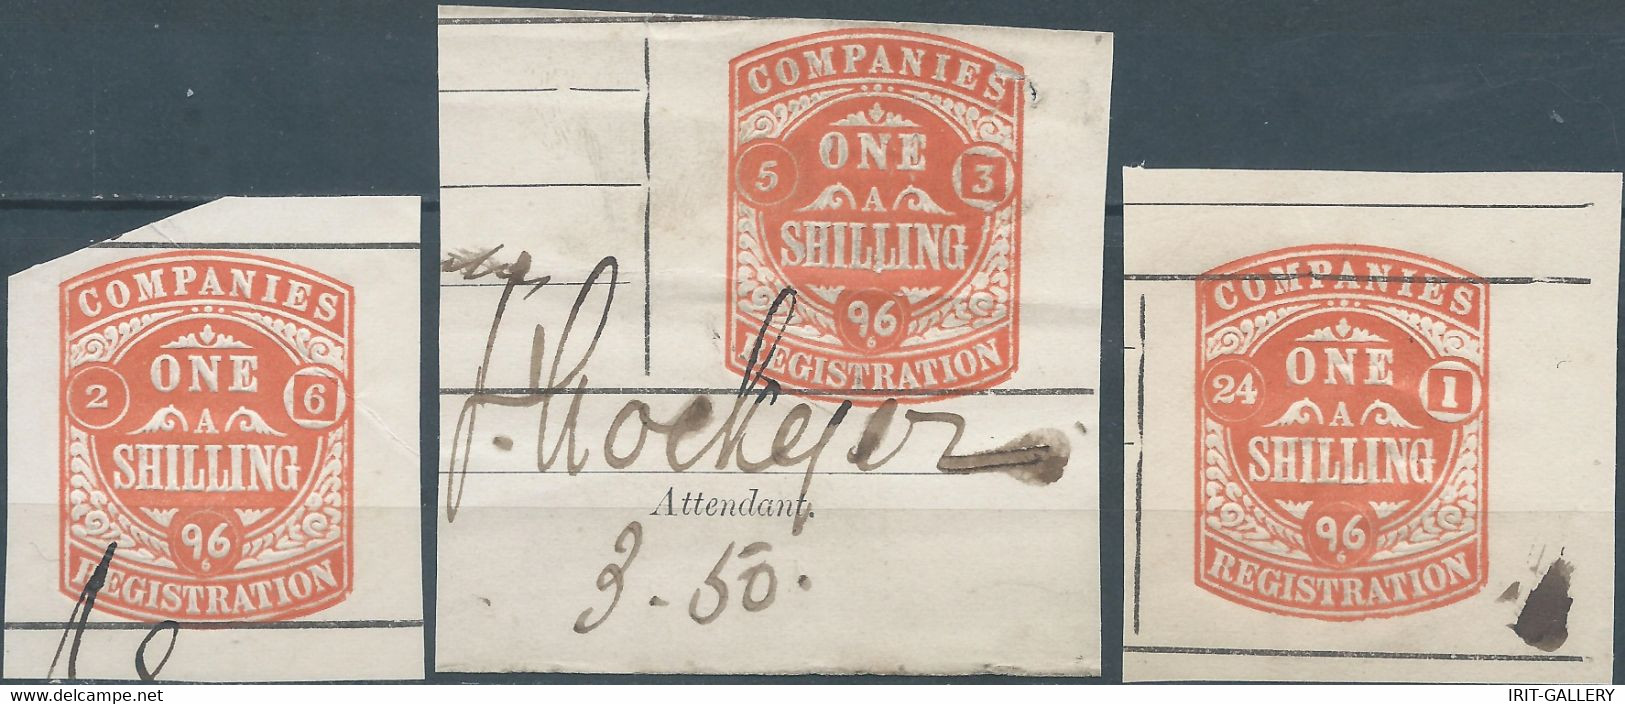 Great Britain-ENGLAND,1896 Tax Fee,COMPANIES REGISTRATION 1 SHILLING - Fiscaux